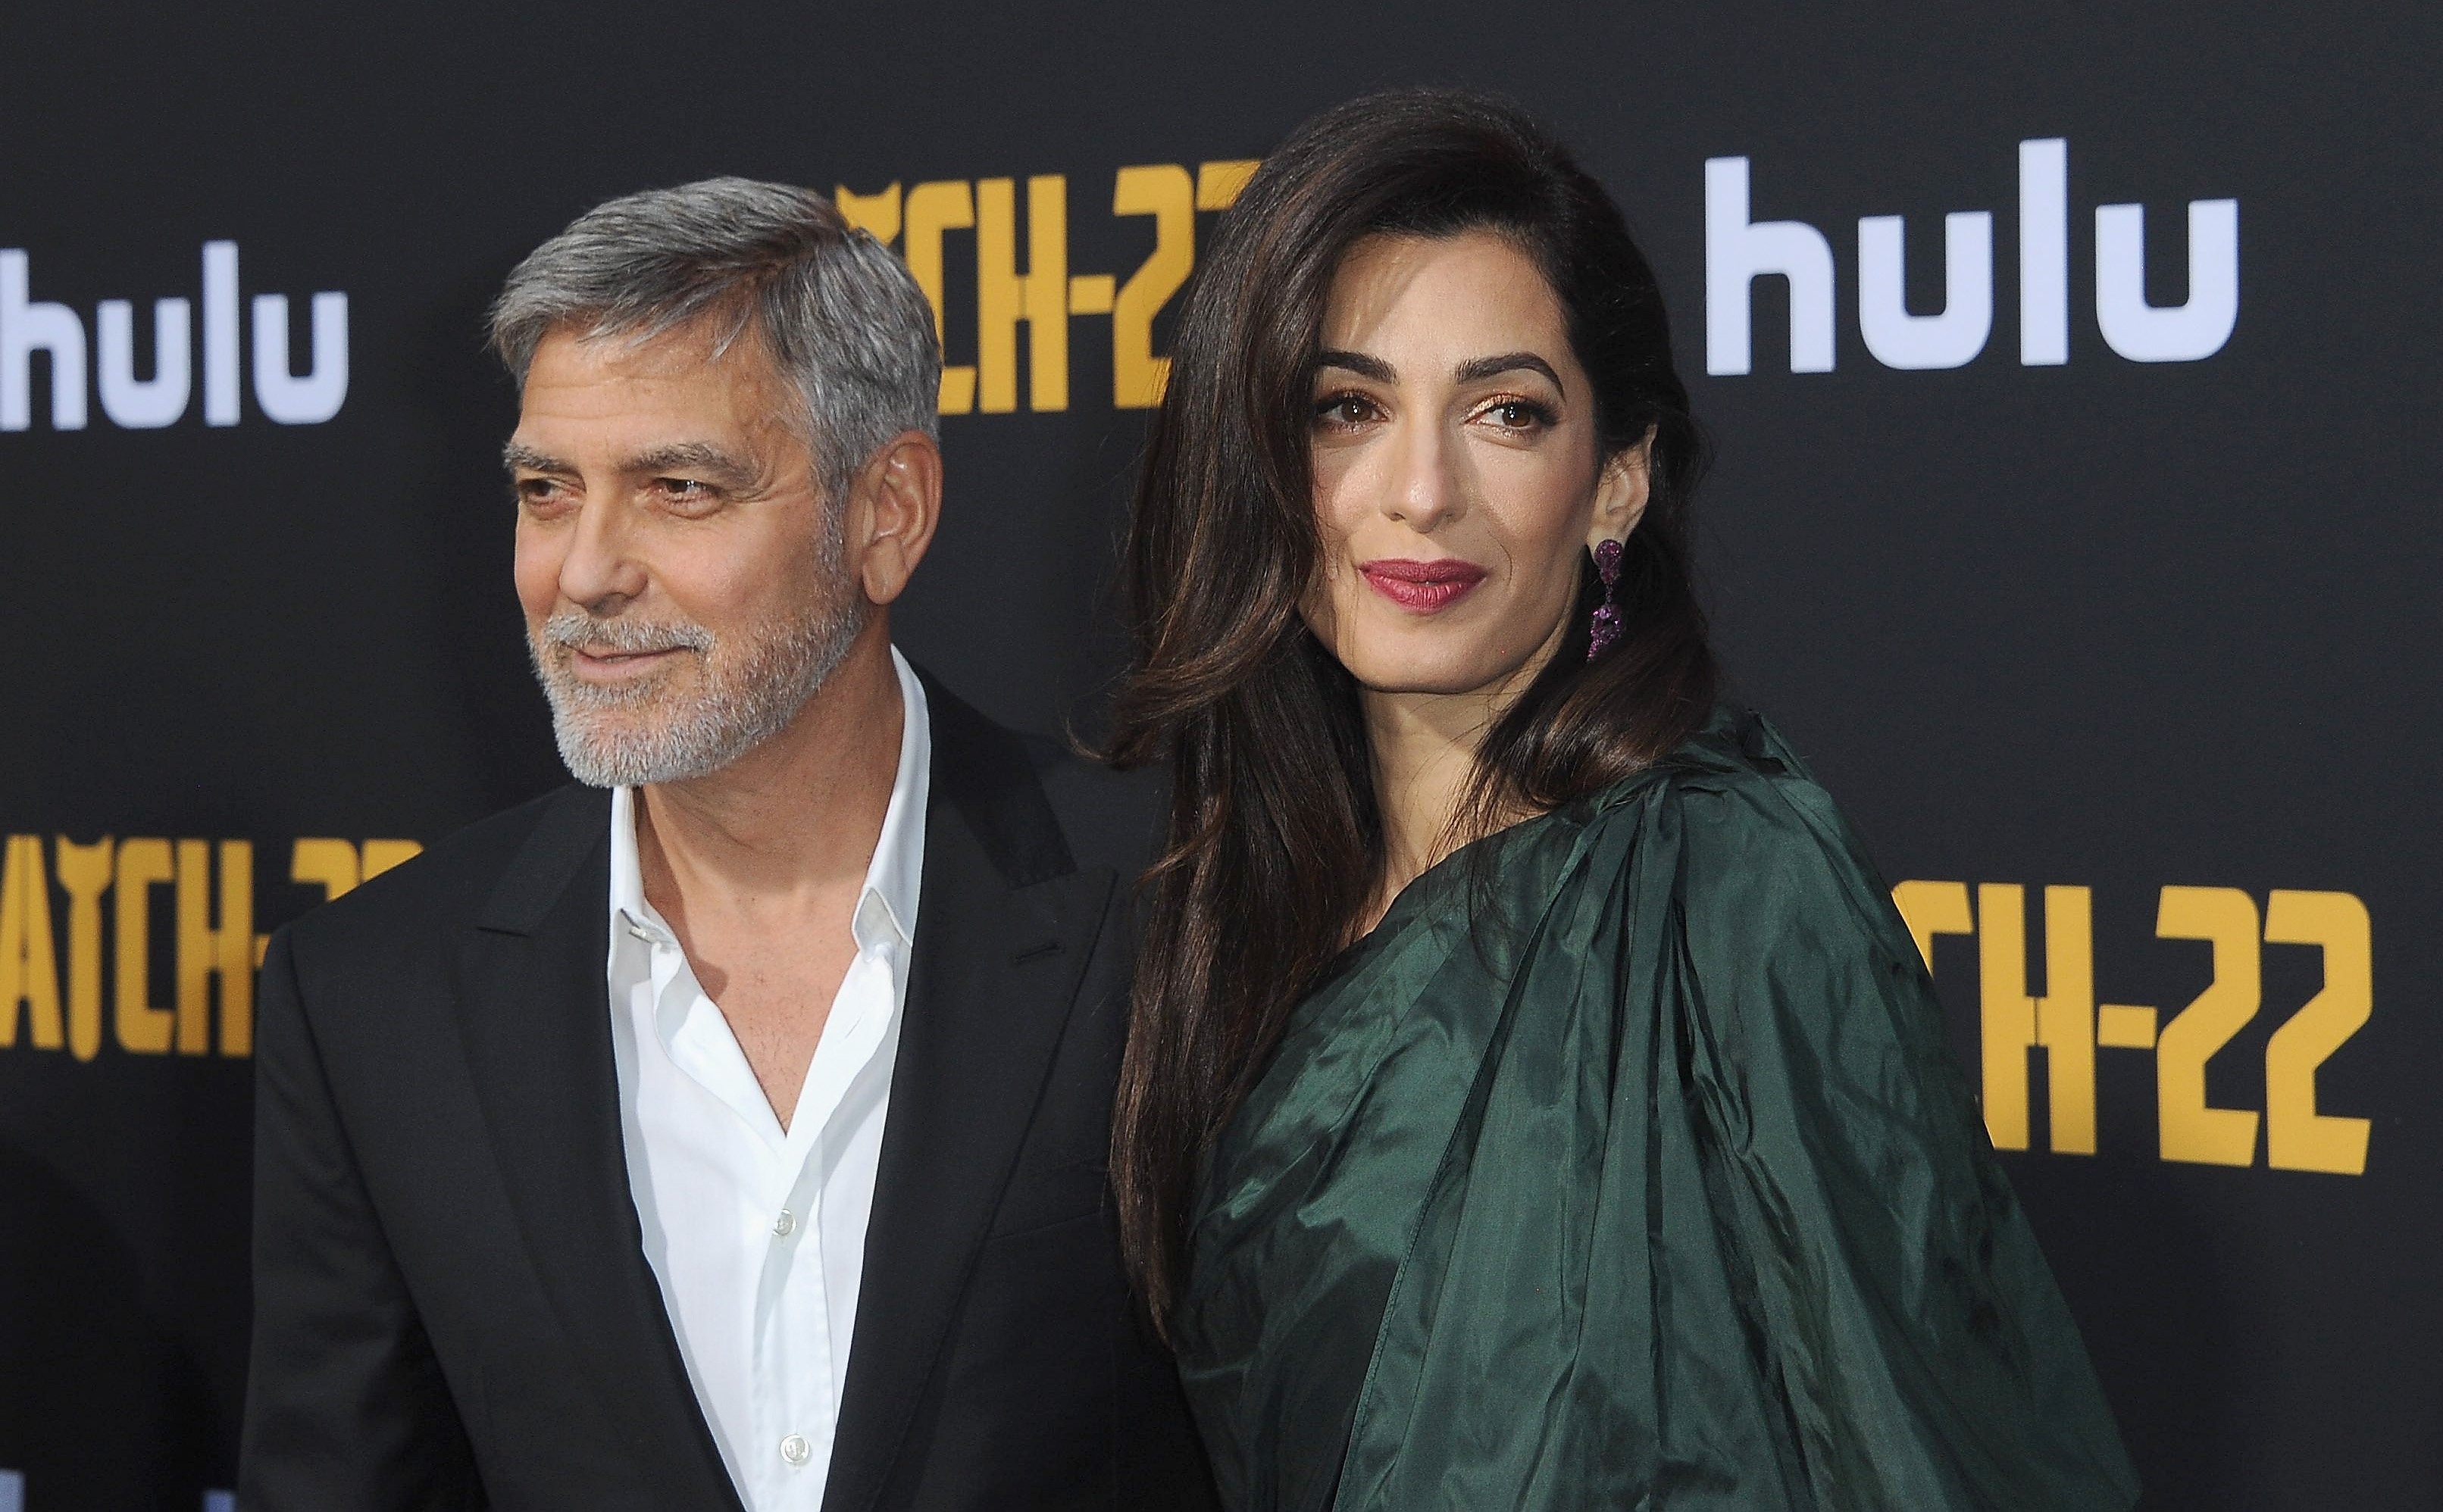 George and Amal Clooney at the Hollywood premiere of "Catch-22" in May 2019. | Photo: Getty Images